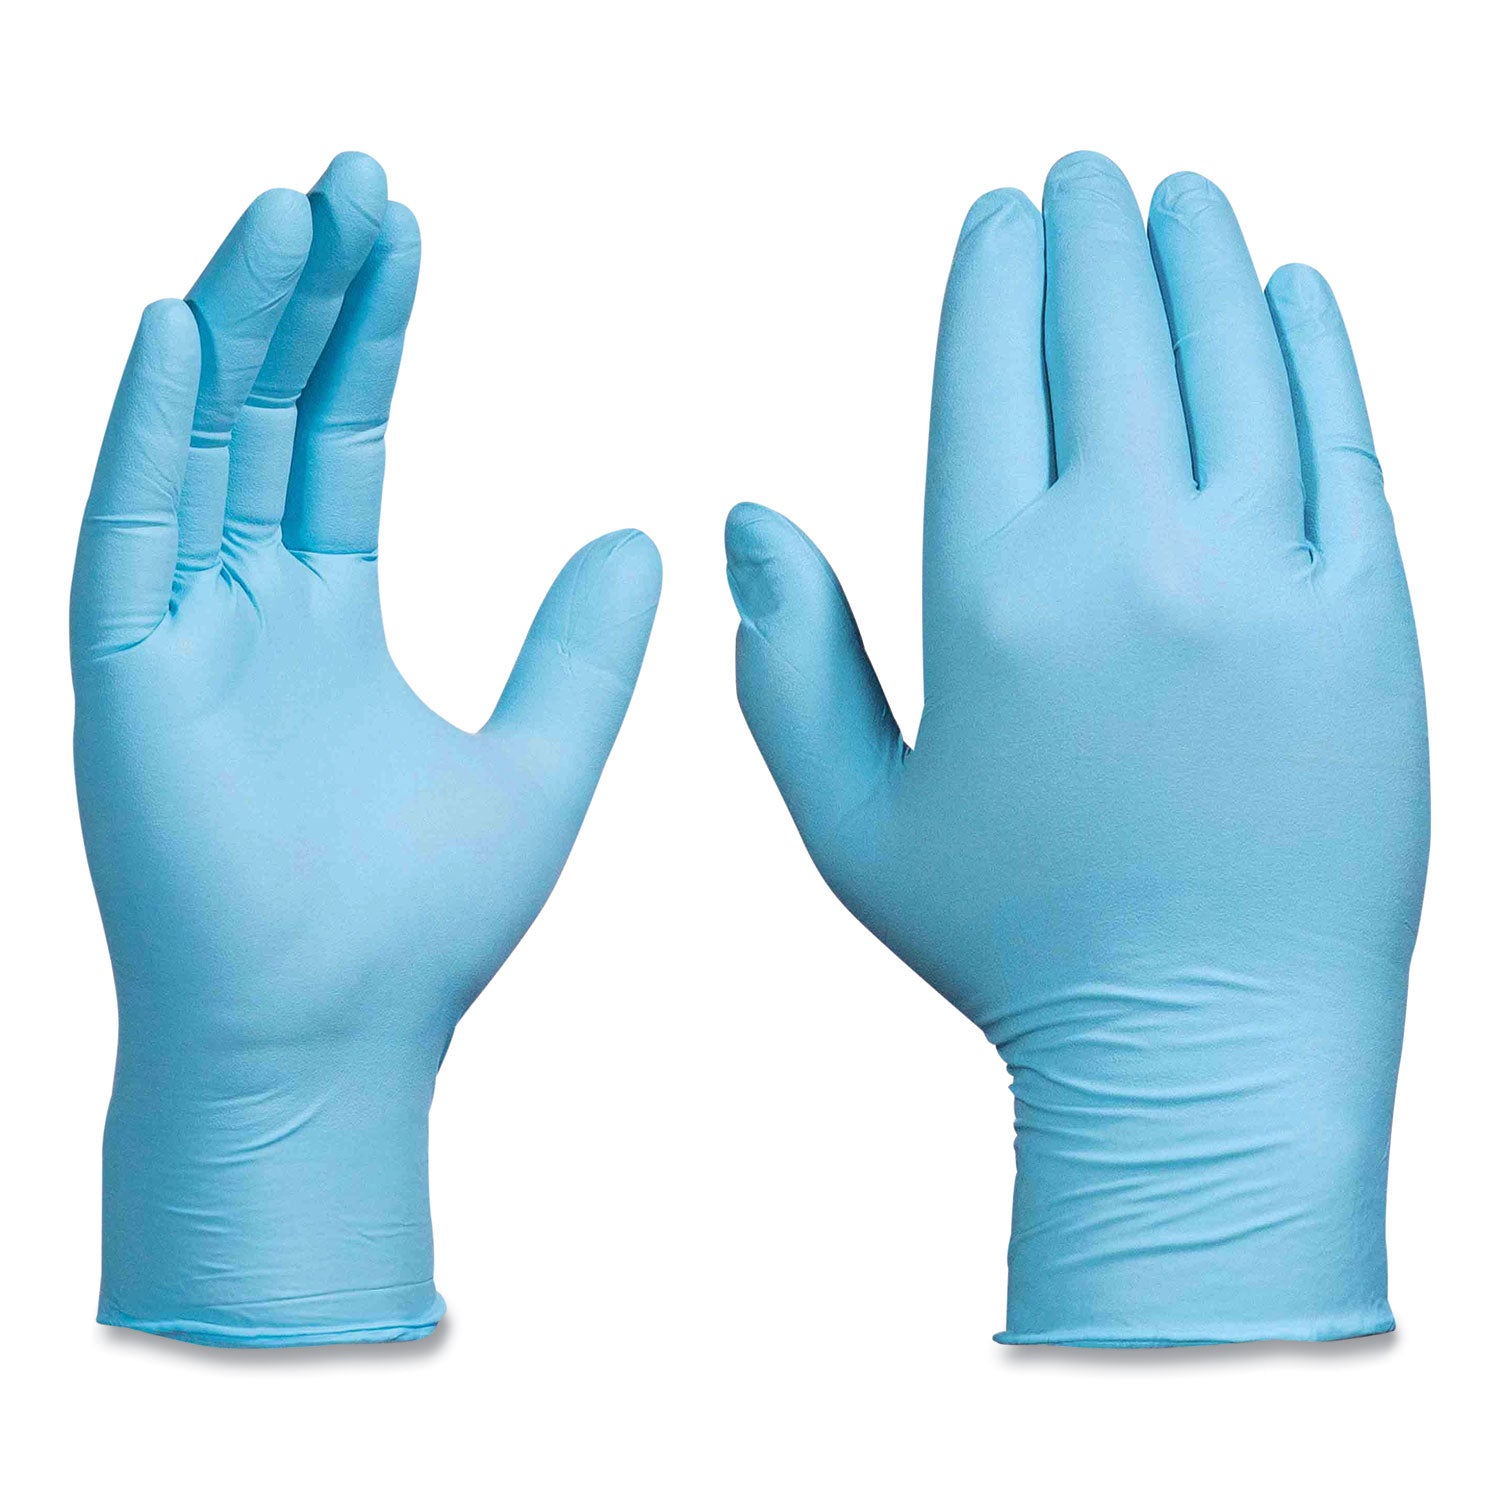 industrial-nitrile-gloves-powder-free-5-mil-blue-x-large-100-gloves-box-10-boxes-carton_axcinpf48100 - 2